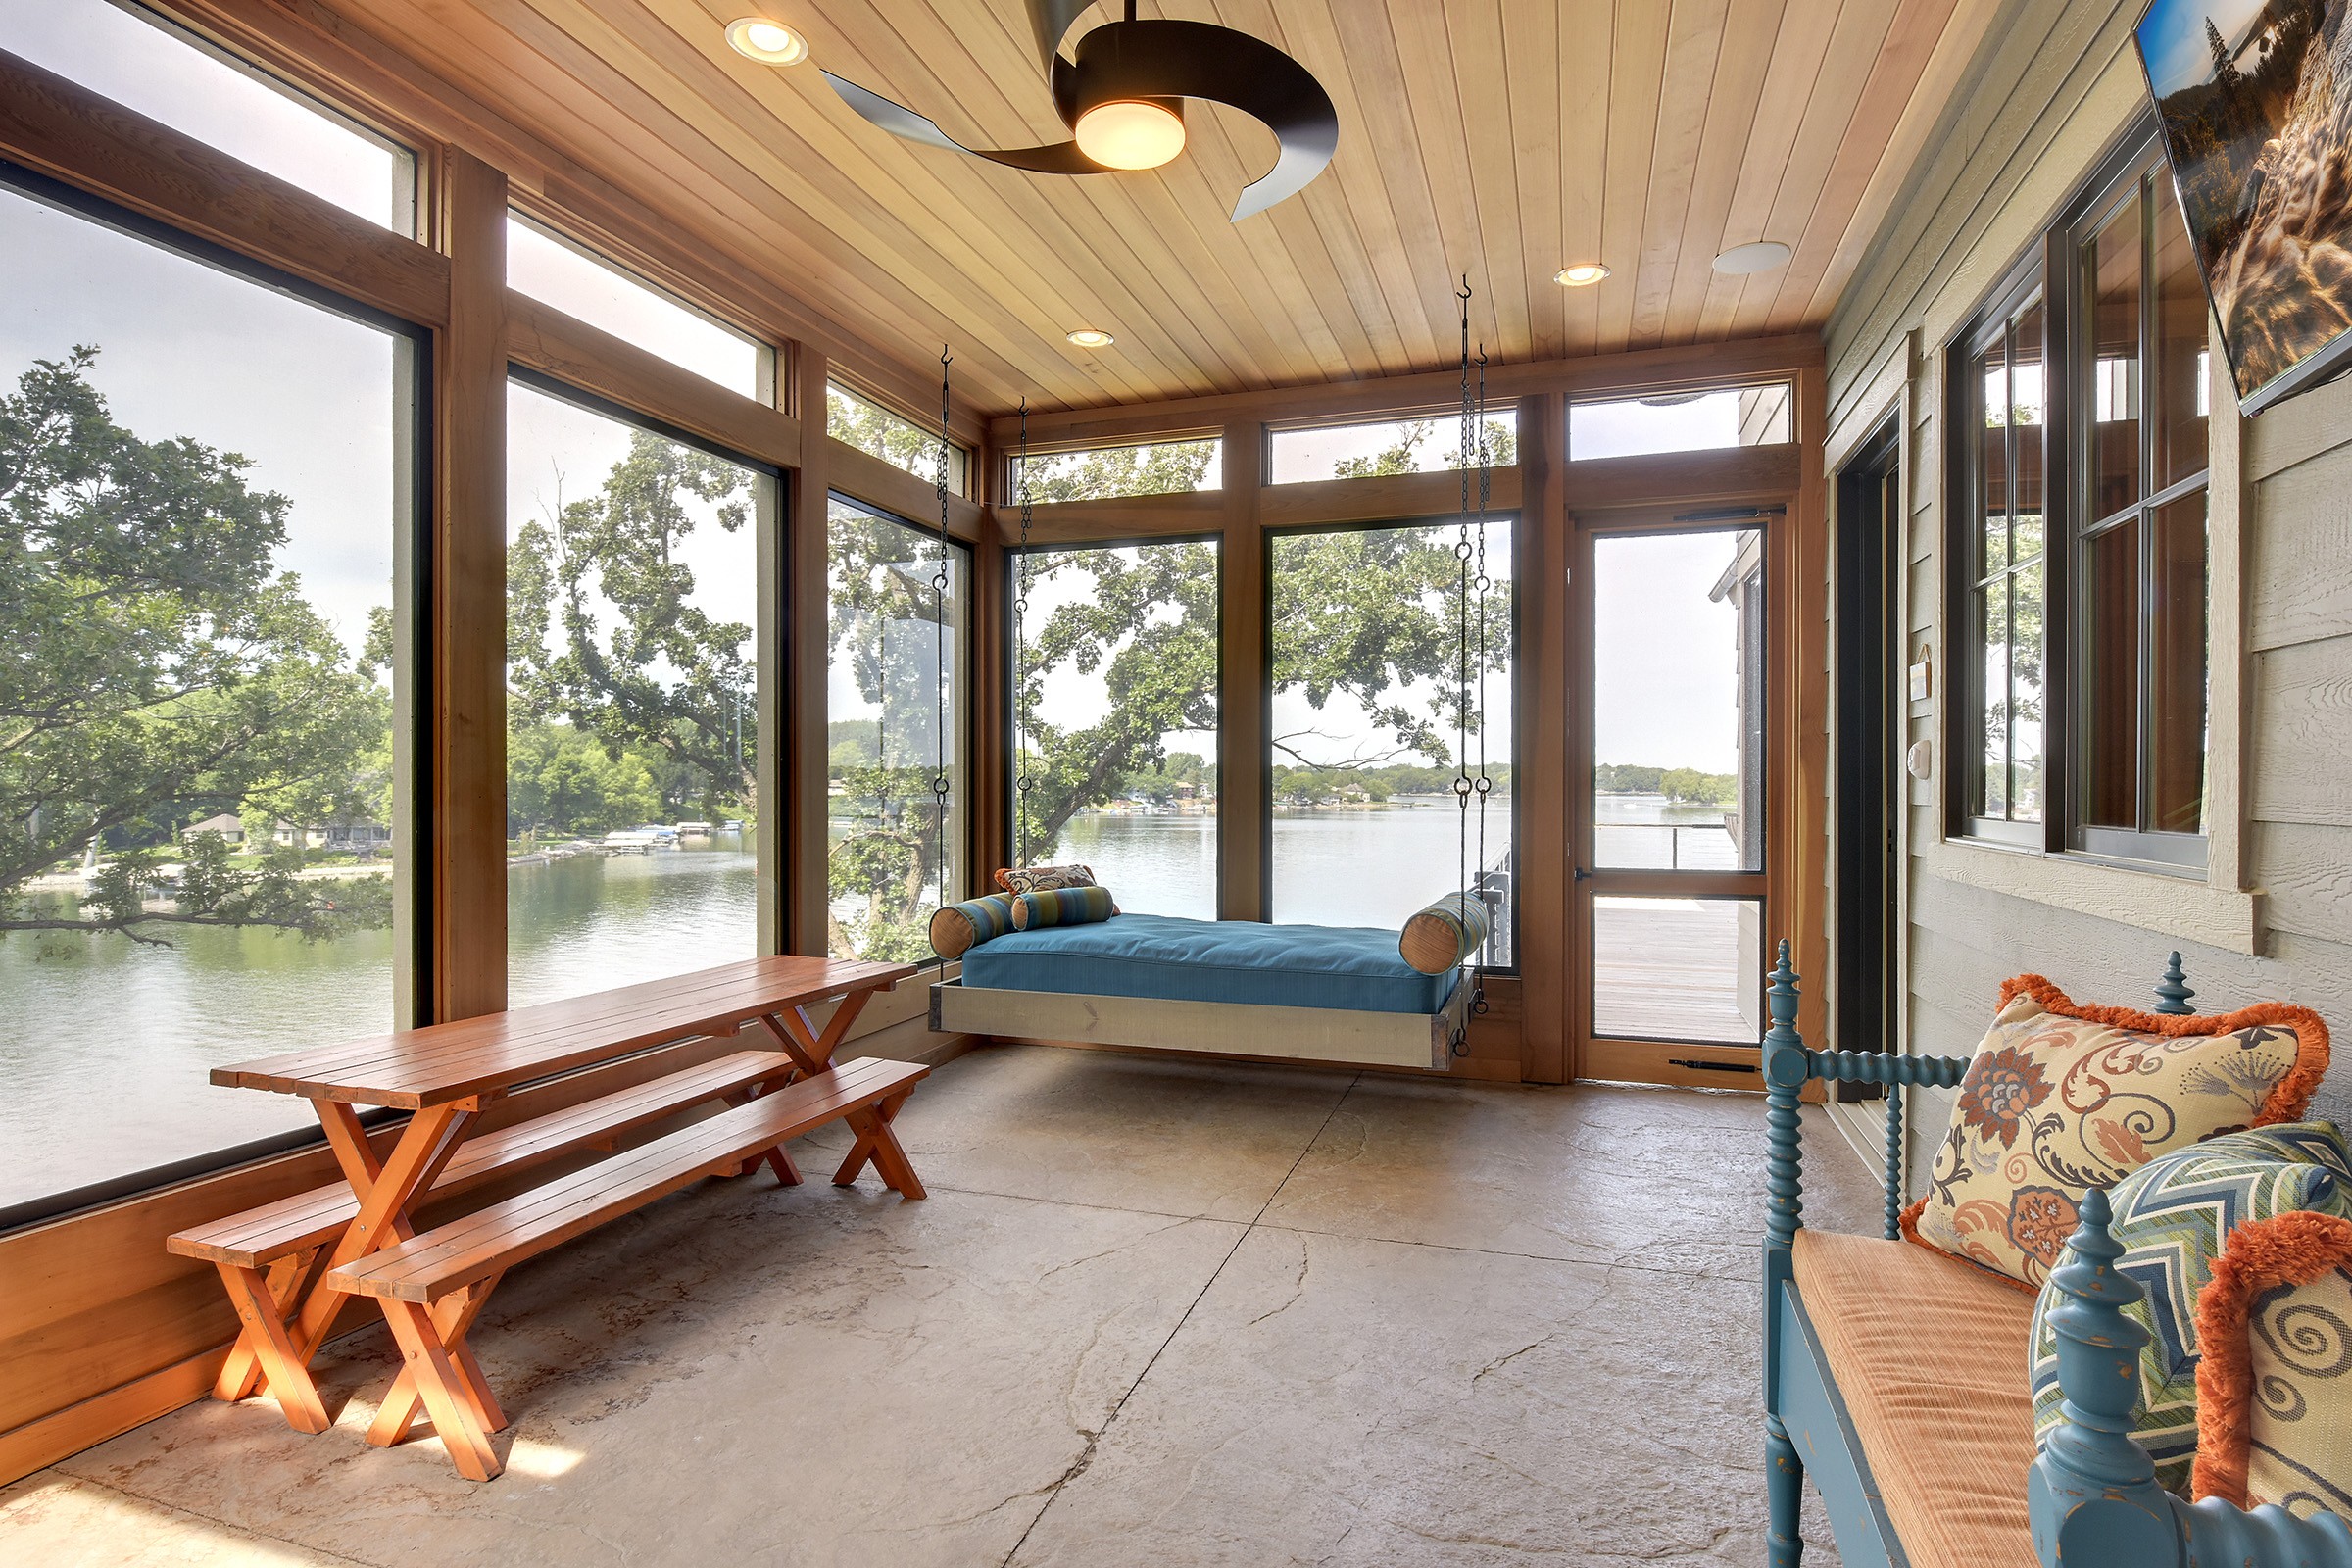 A sunroom with a bench and a view of a lake.